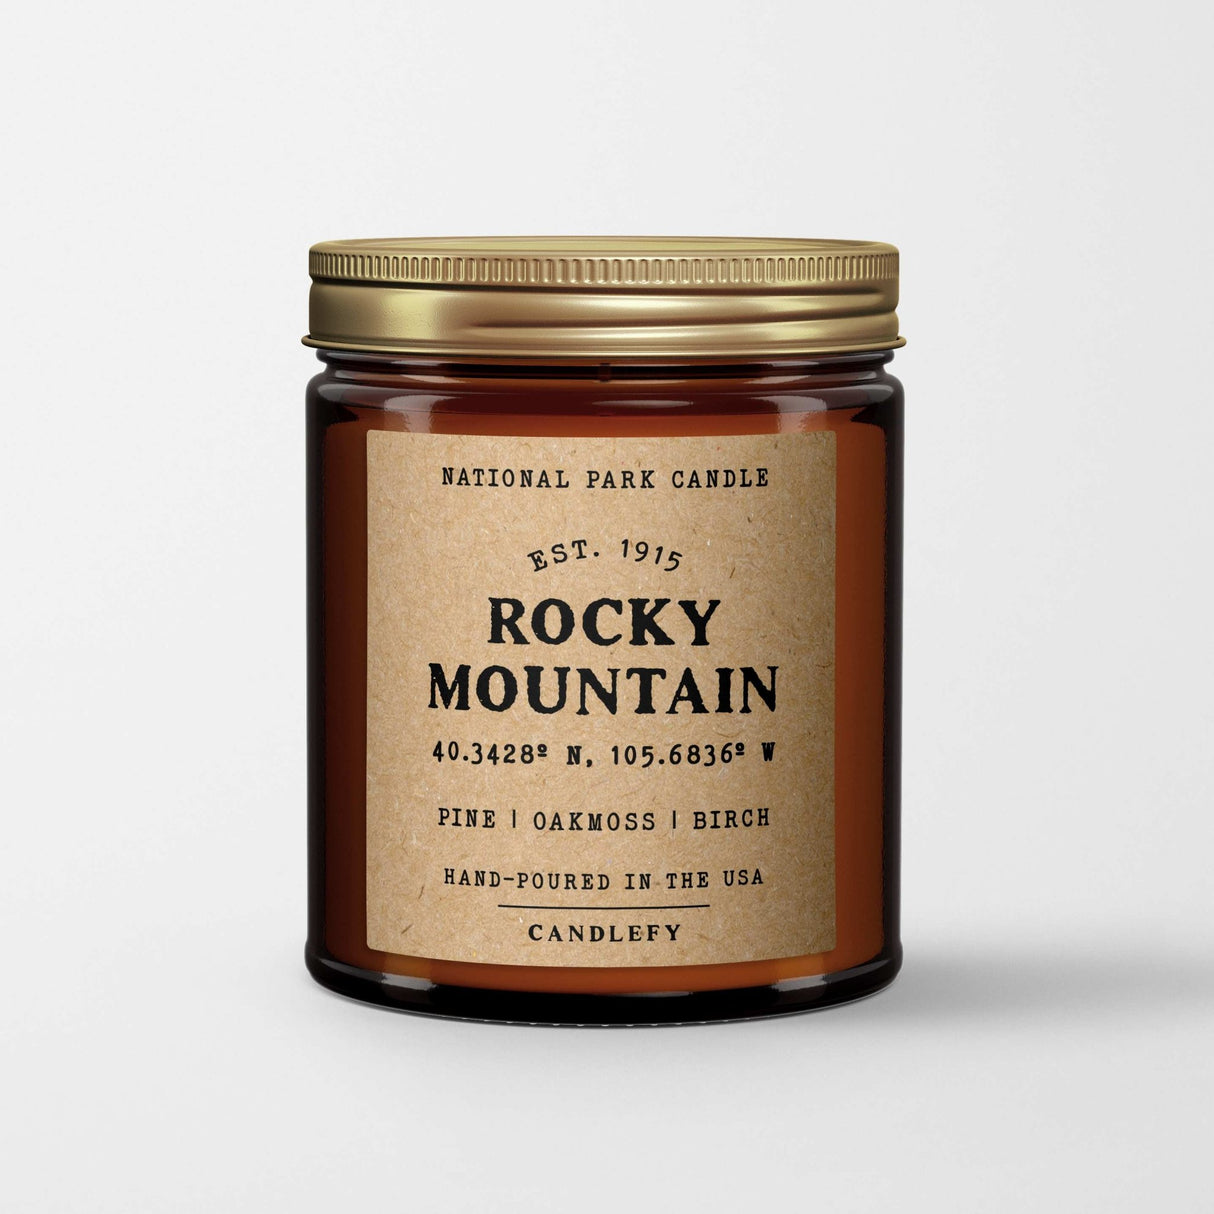 Rocky Mountains National Park Candle - Candlefy